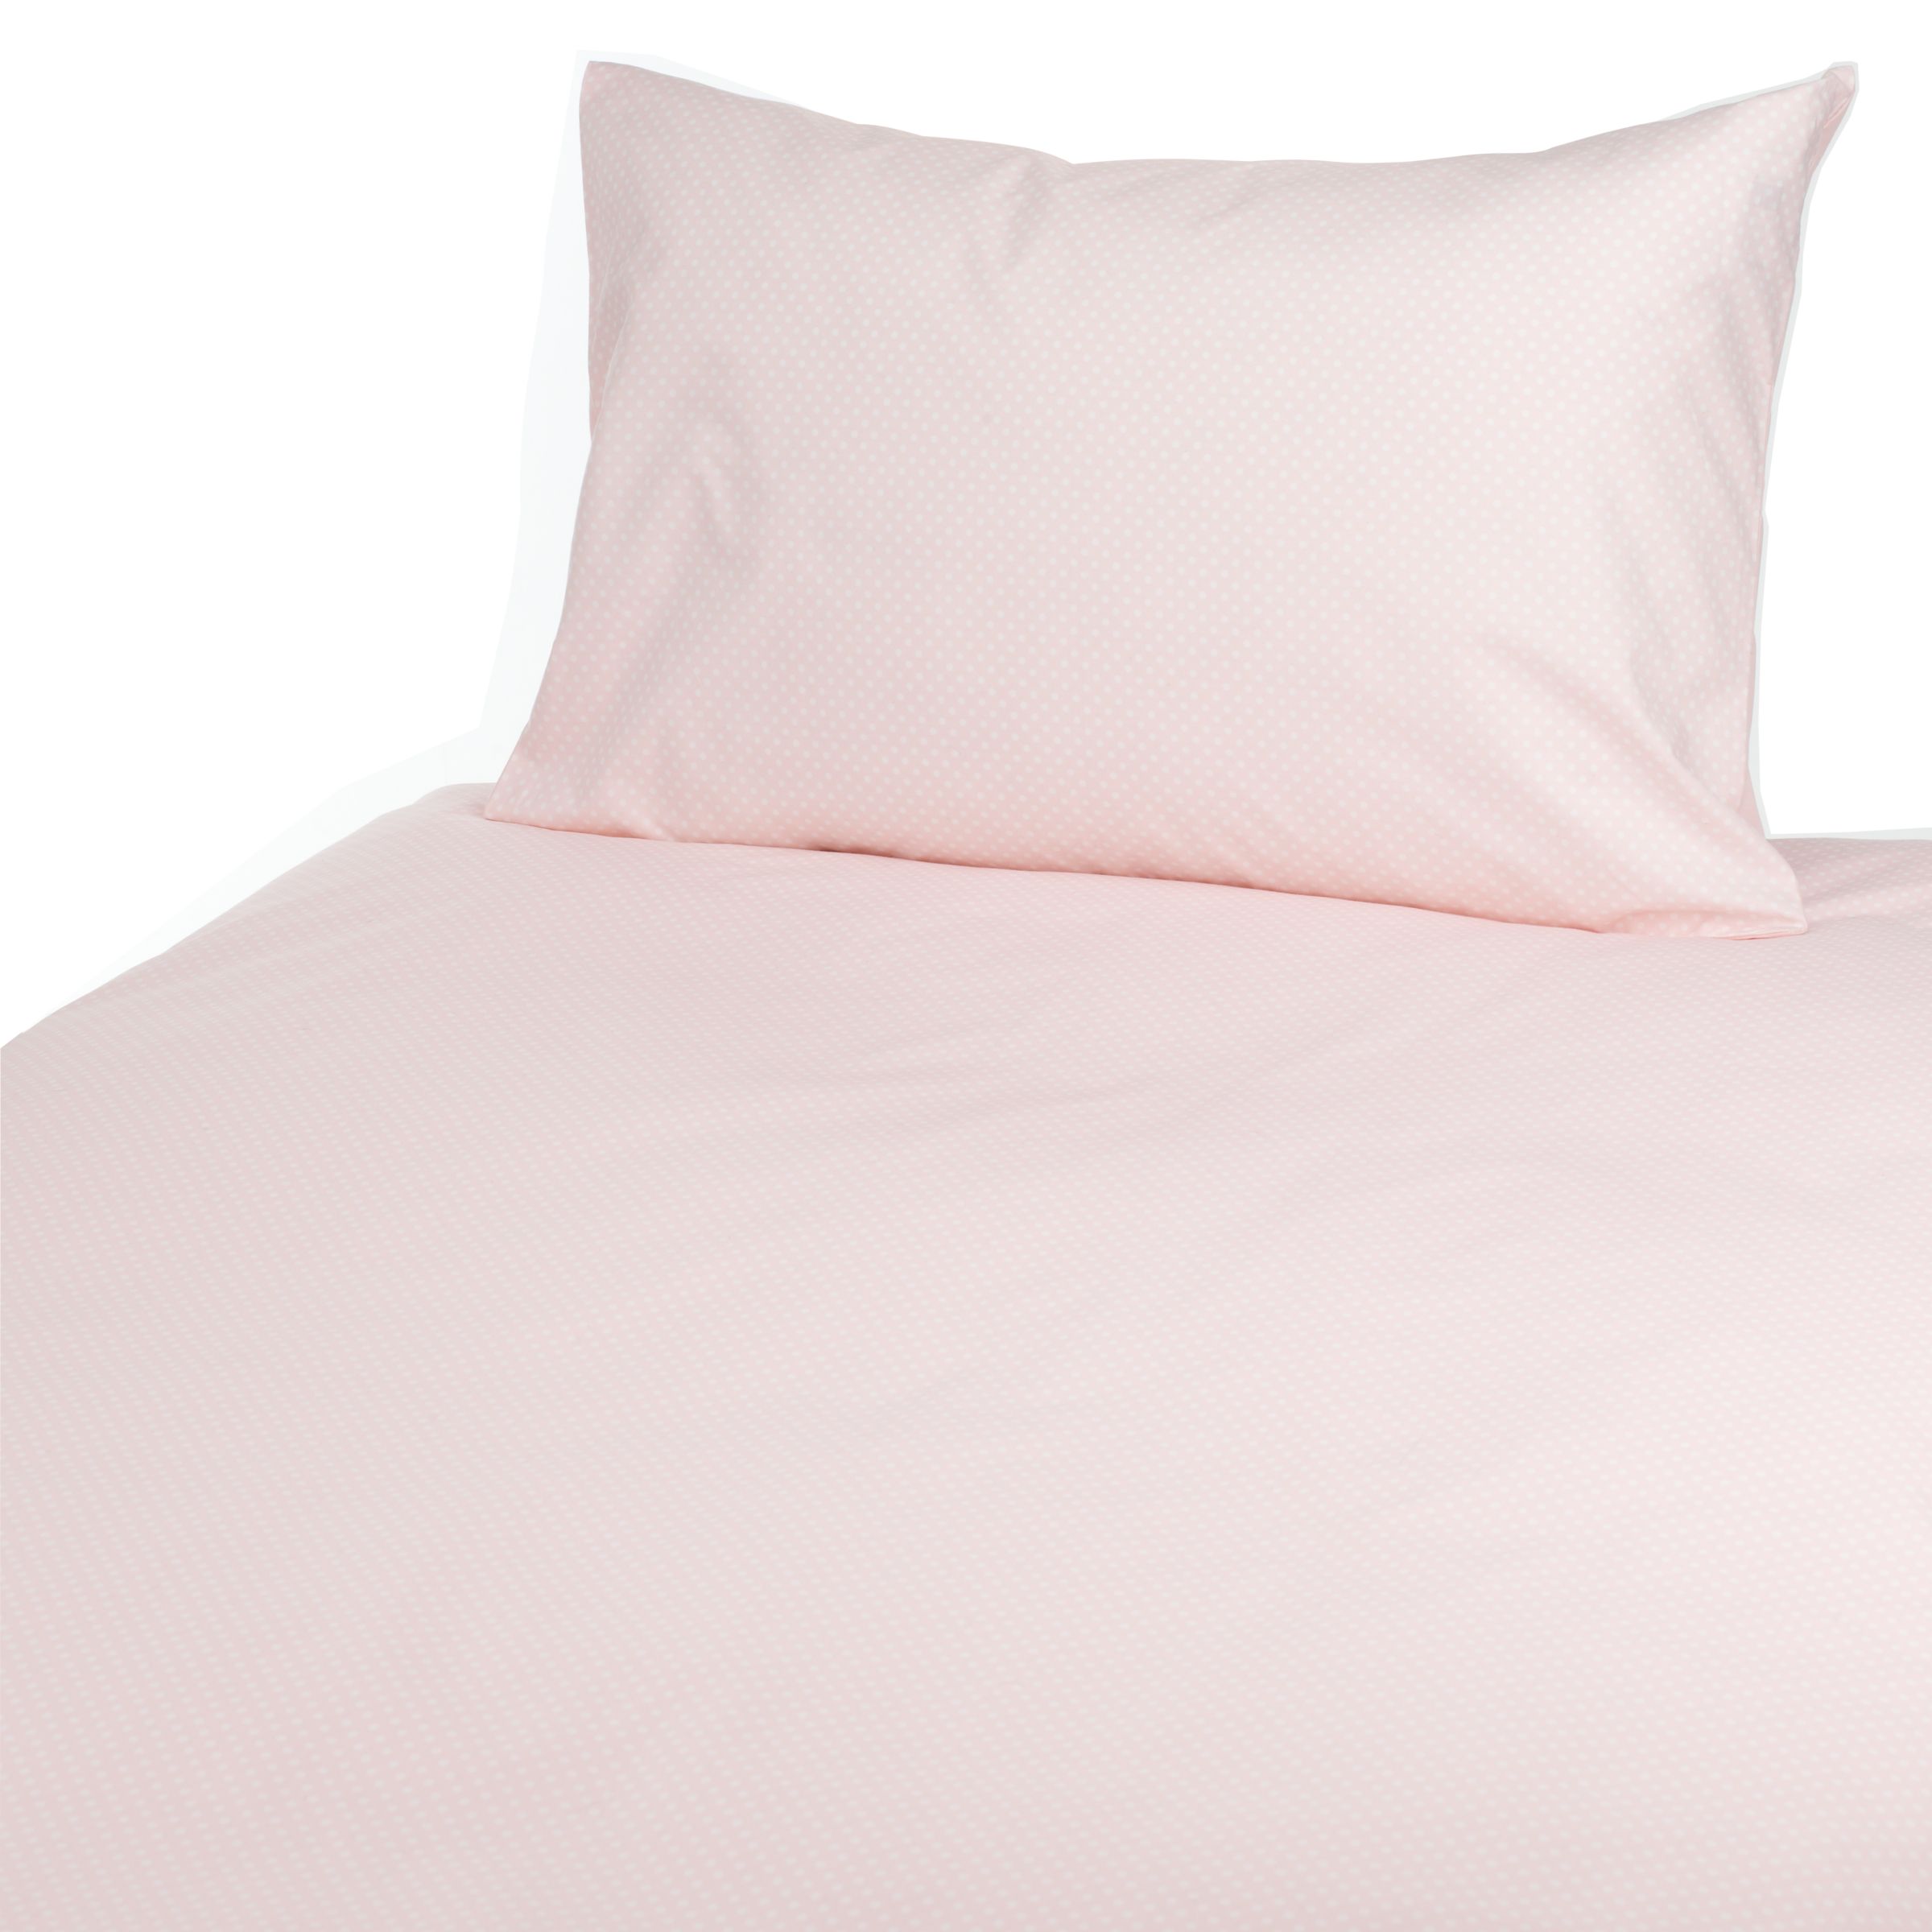 Dotty Cotbed Duvet Cover and Pillow